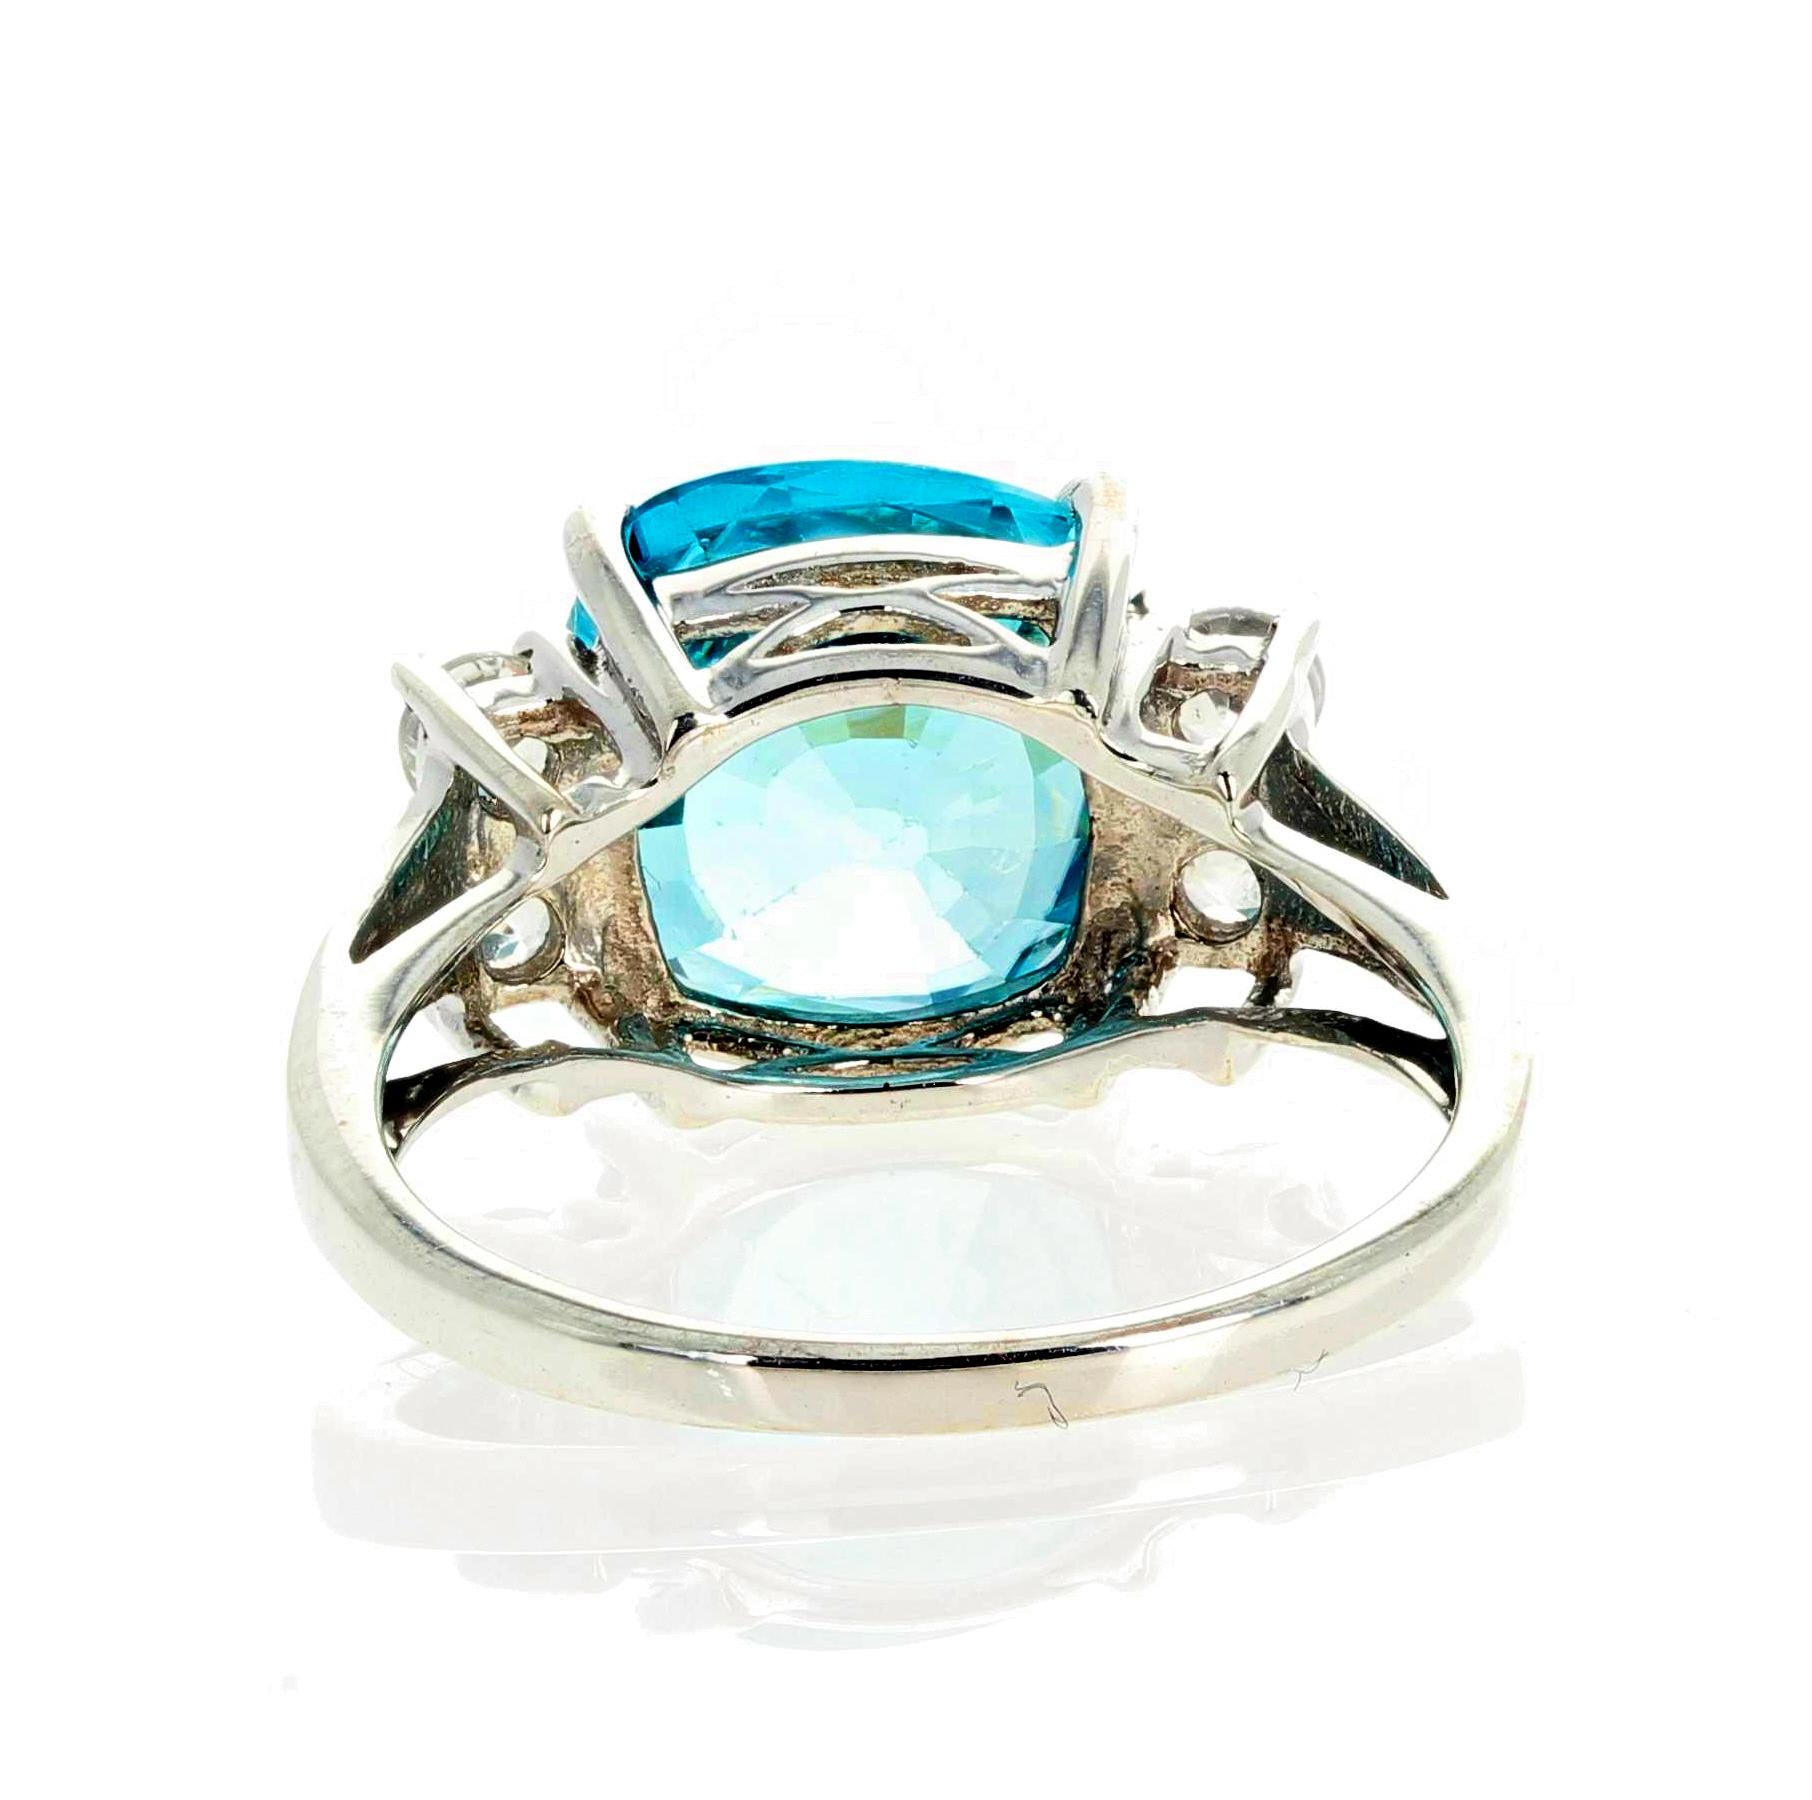 Women's AJD Intense Blue 6.82Ct. Natural Cambodian Zircon & Real Diamonds Cocktail Ring